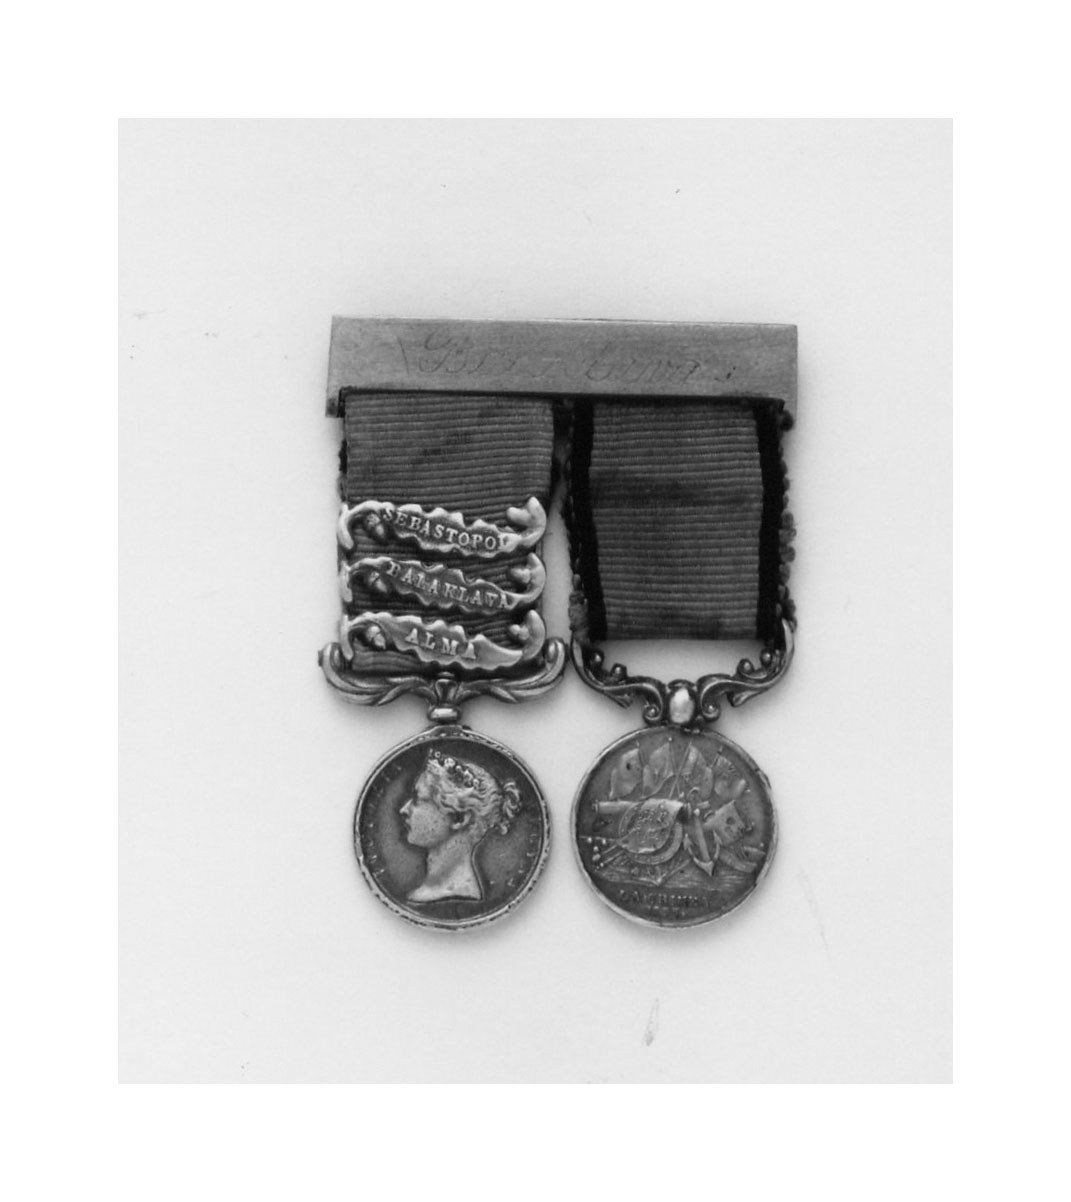 Henry Dyson Naylor's medal miniatures